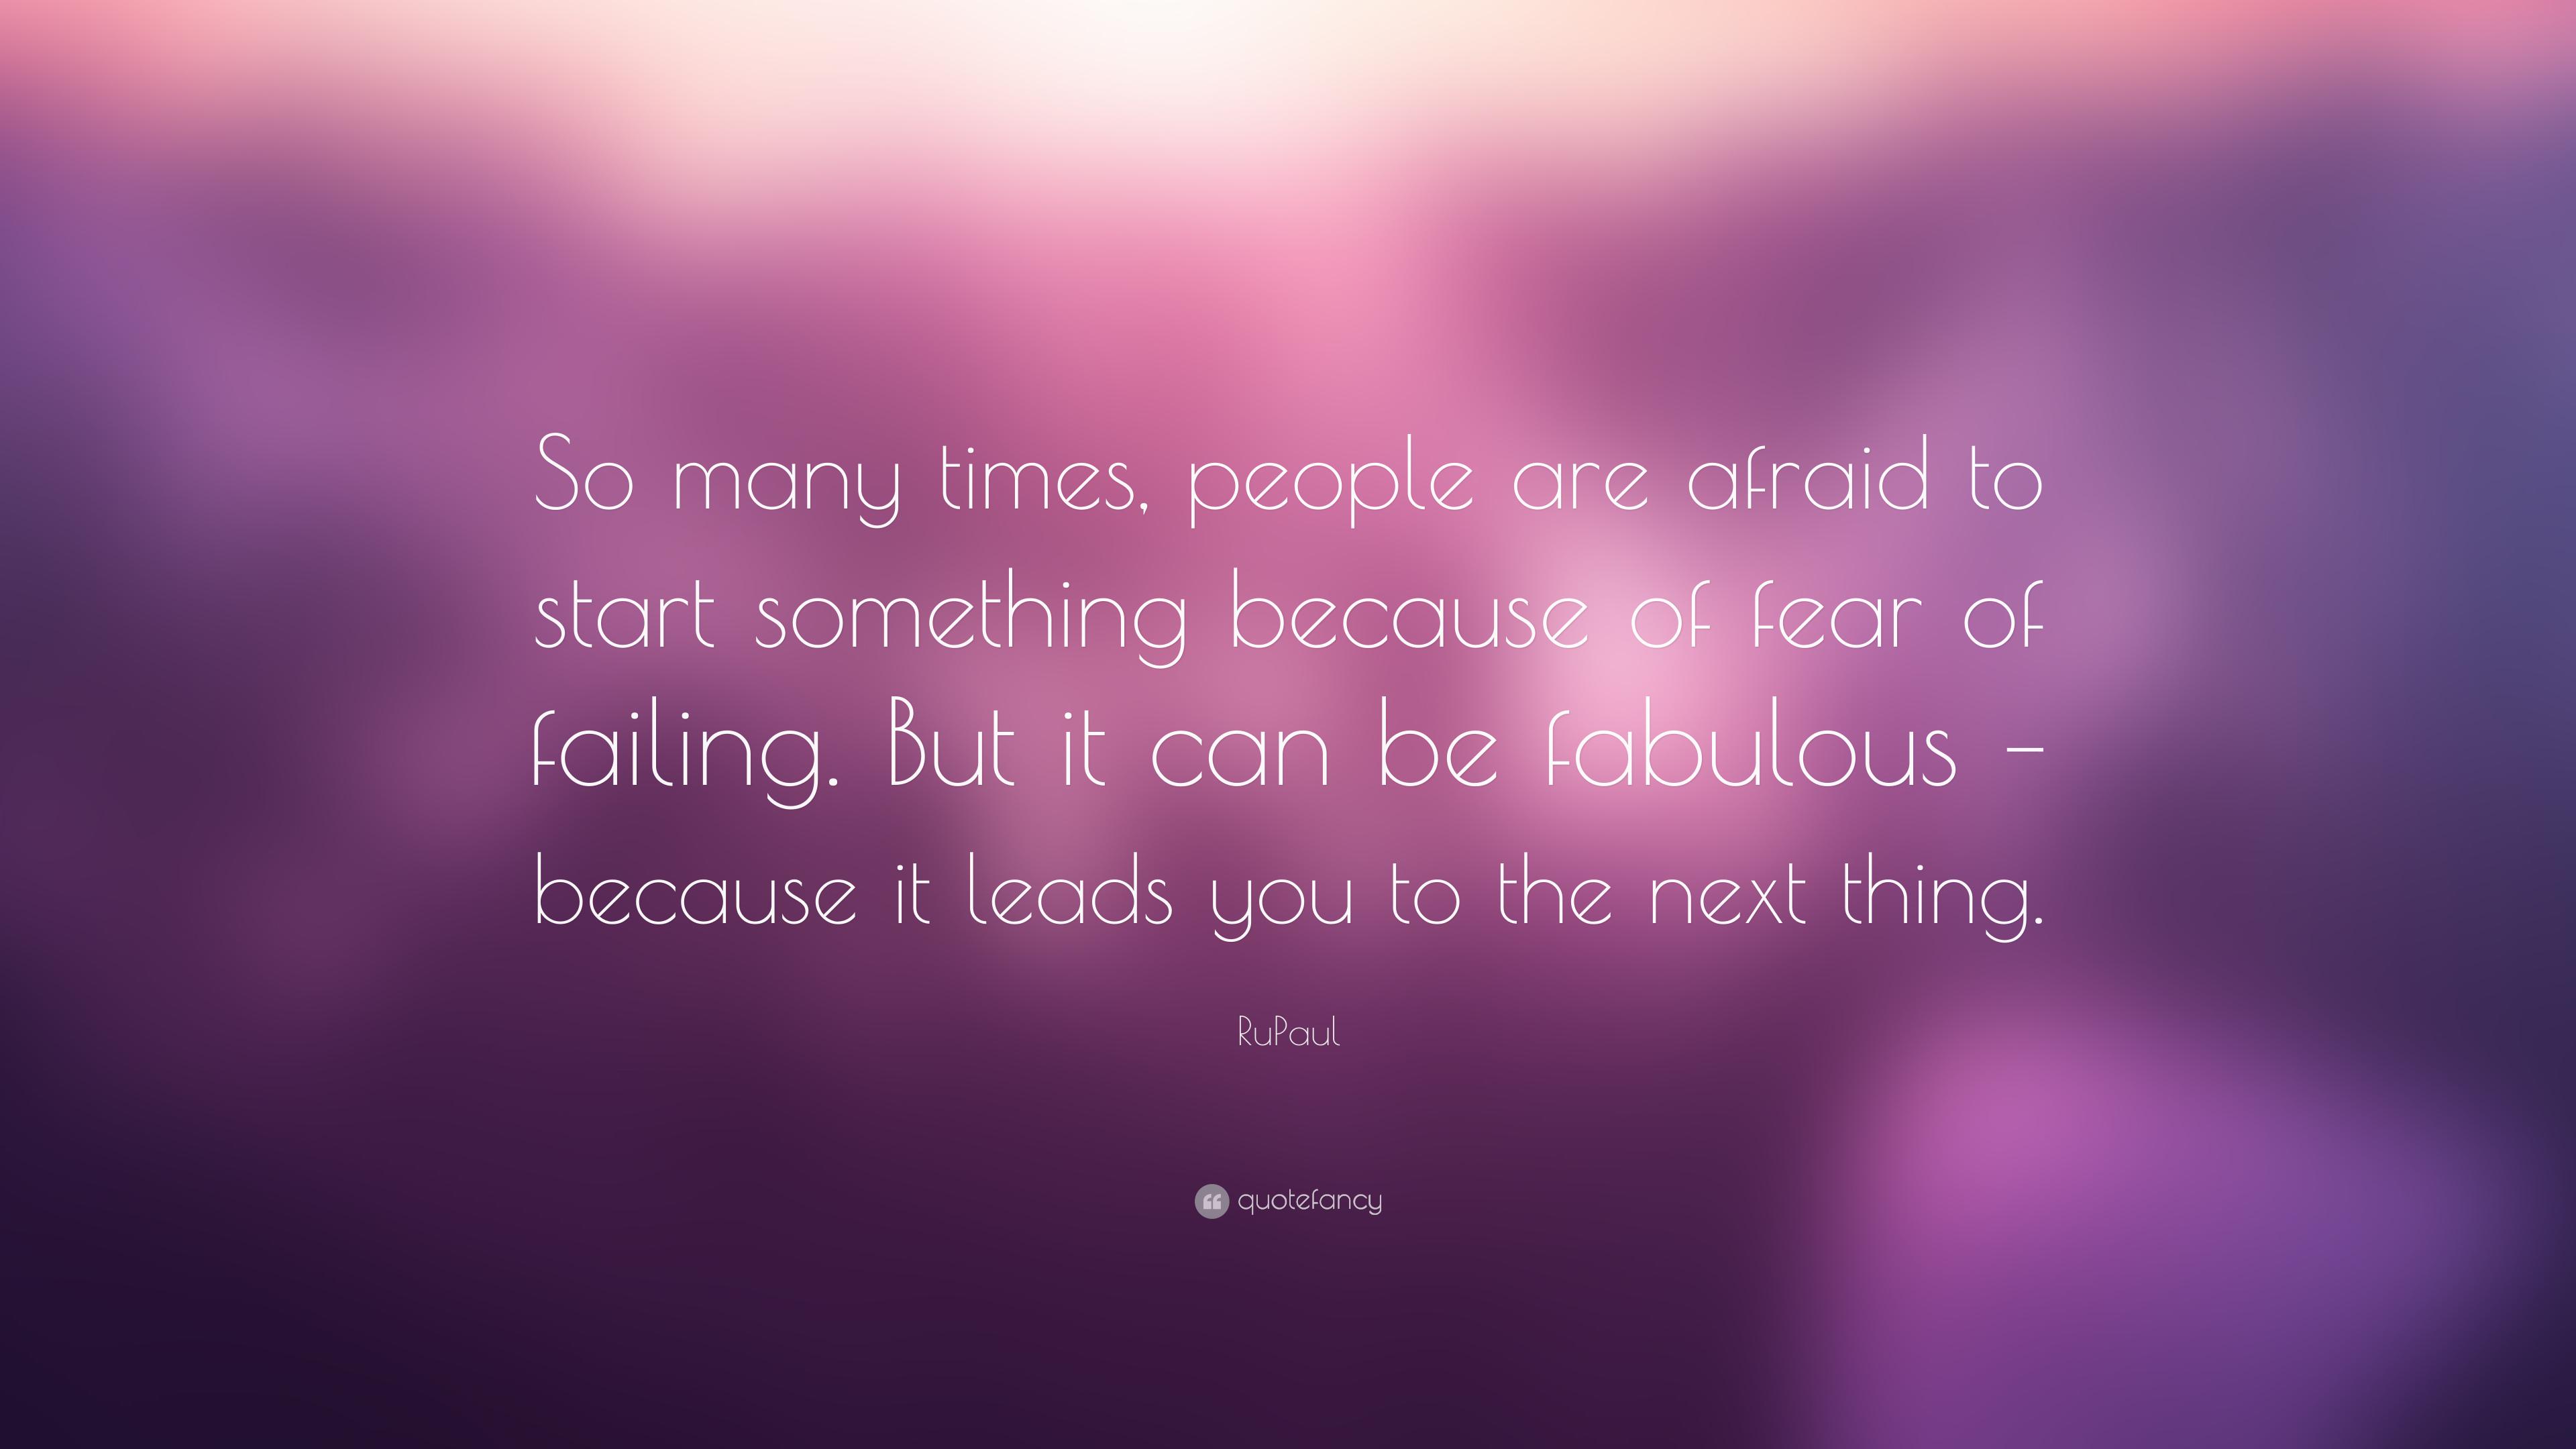 RuPaul Quote: “So many times, people are afraid to start something